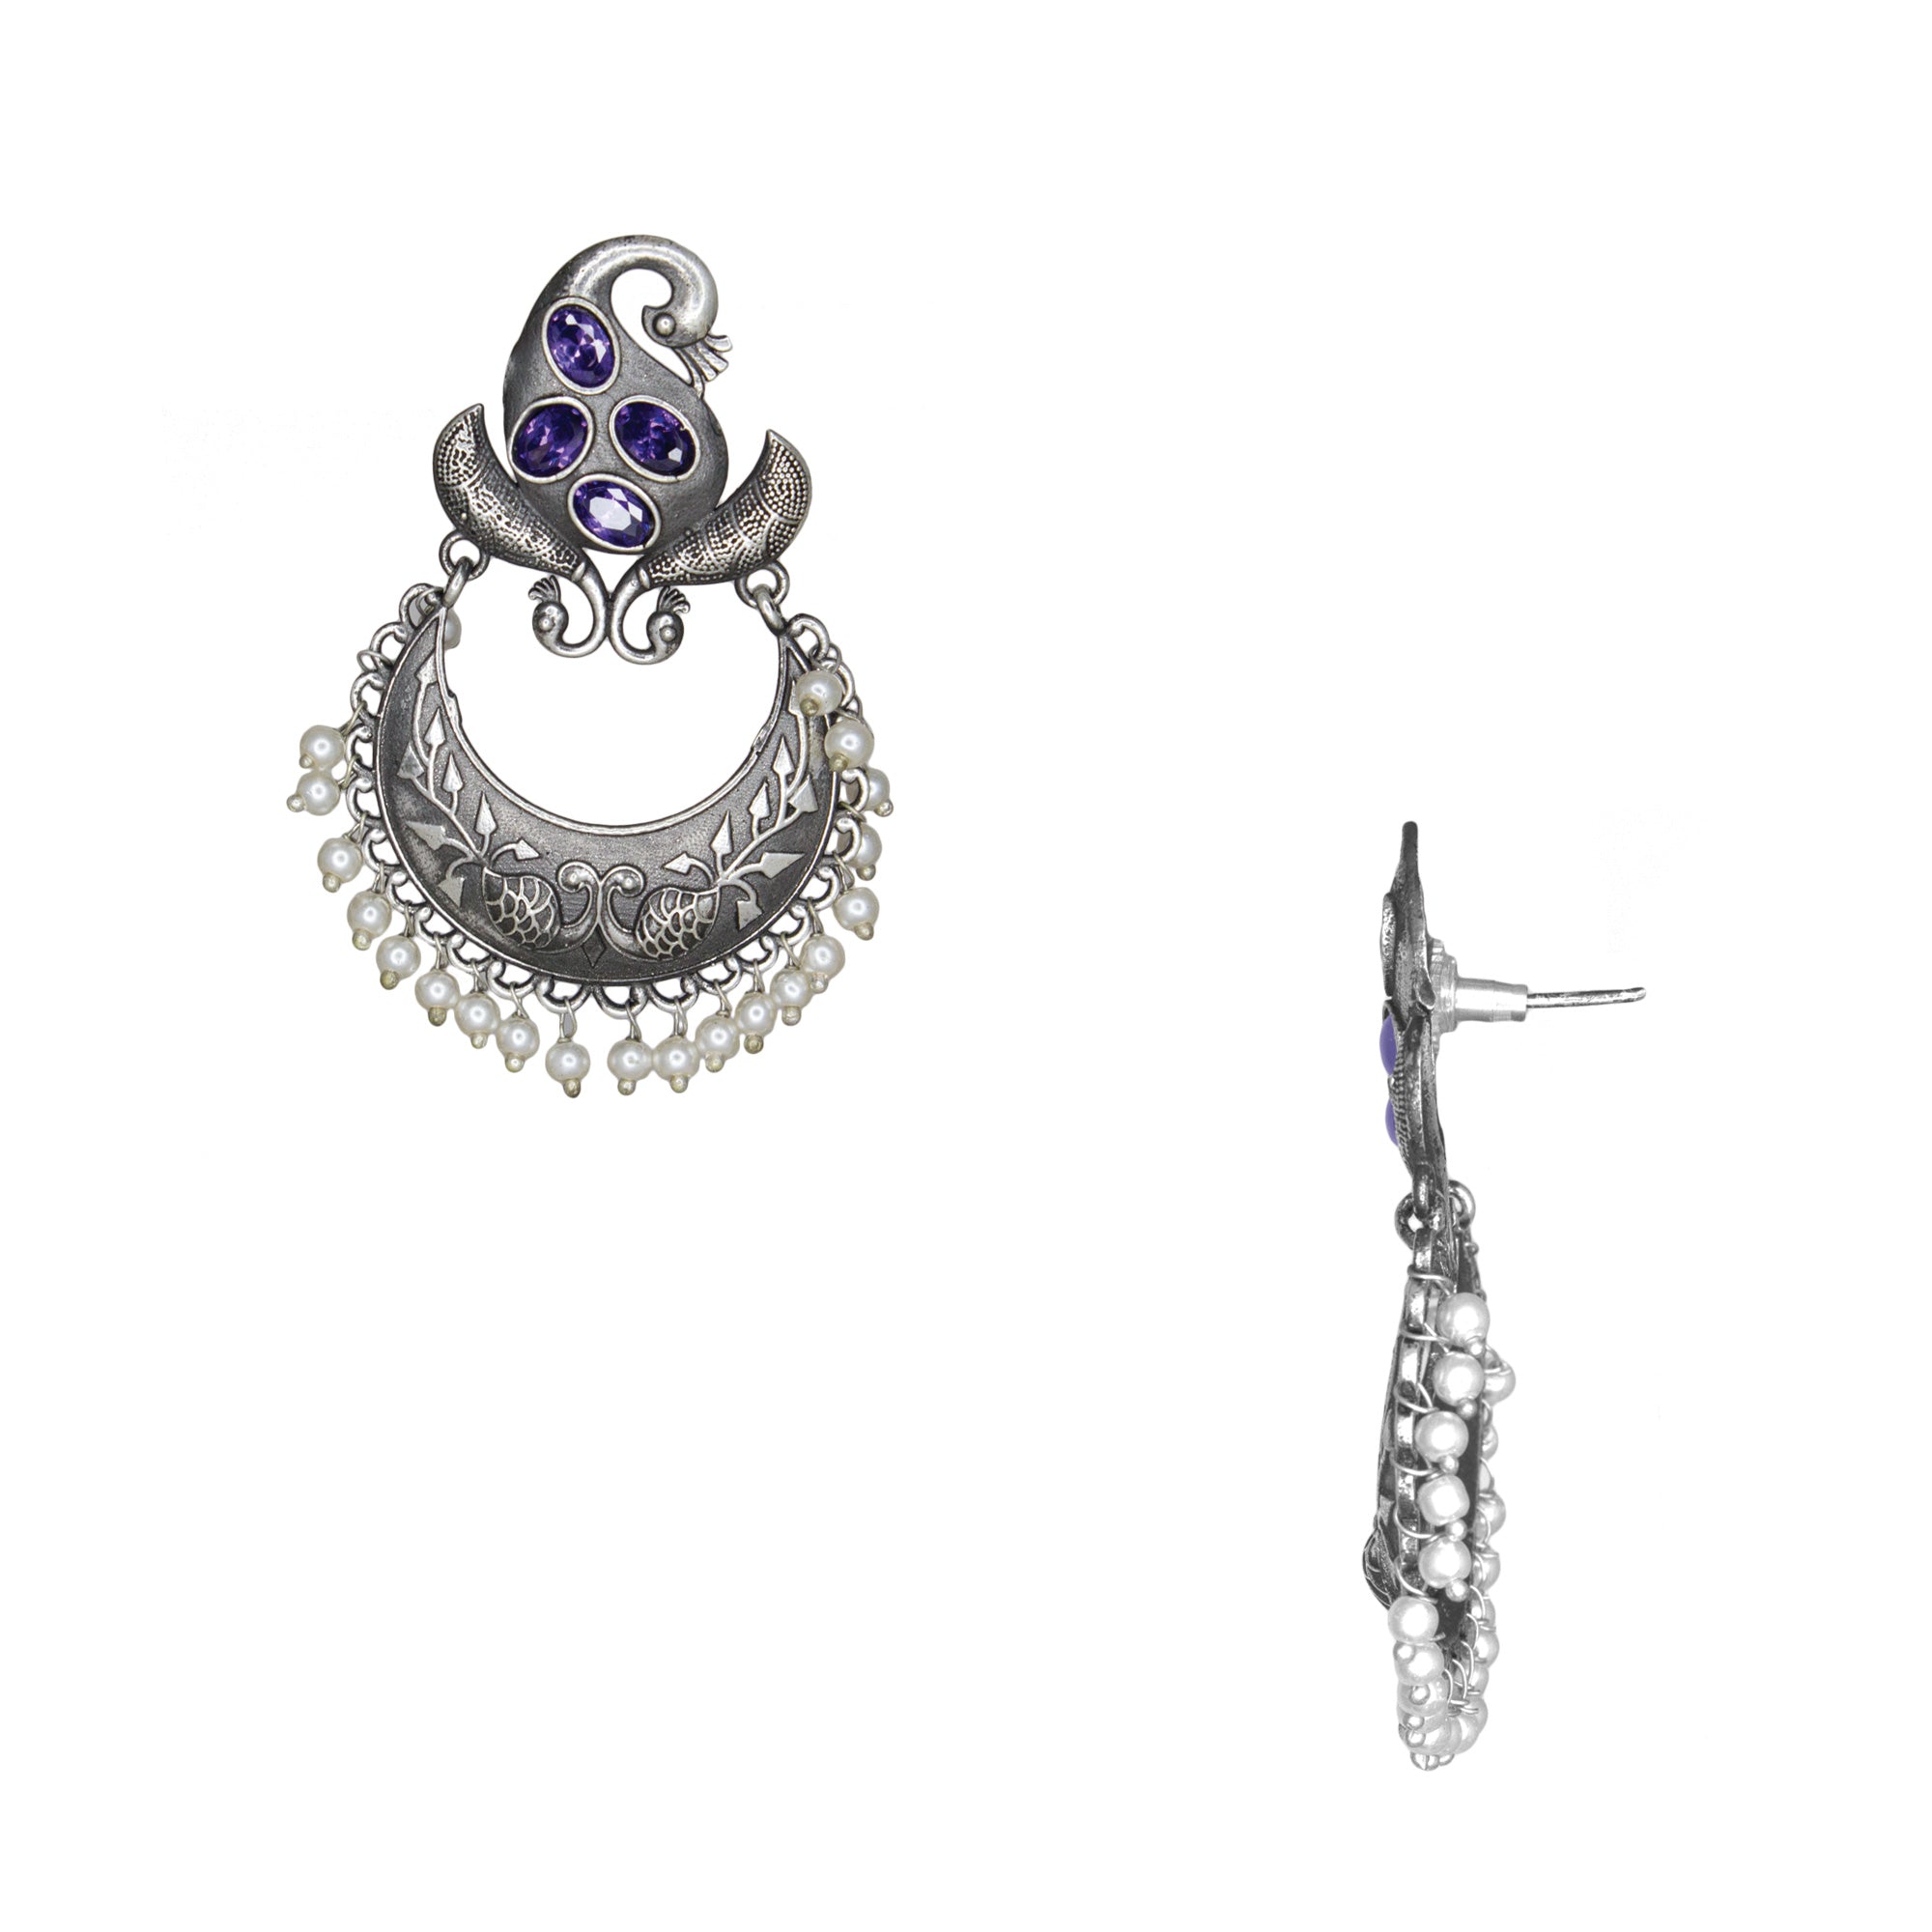 Abhinn Silver Replica Peacock Design Studs With Purple CZ Stones Studded Earrings for Women